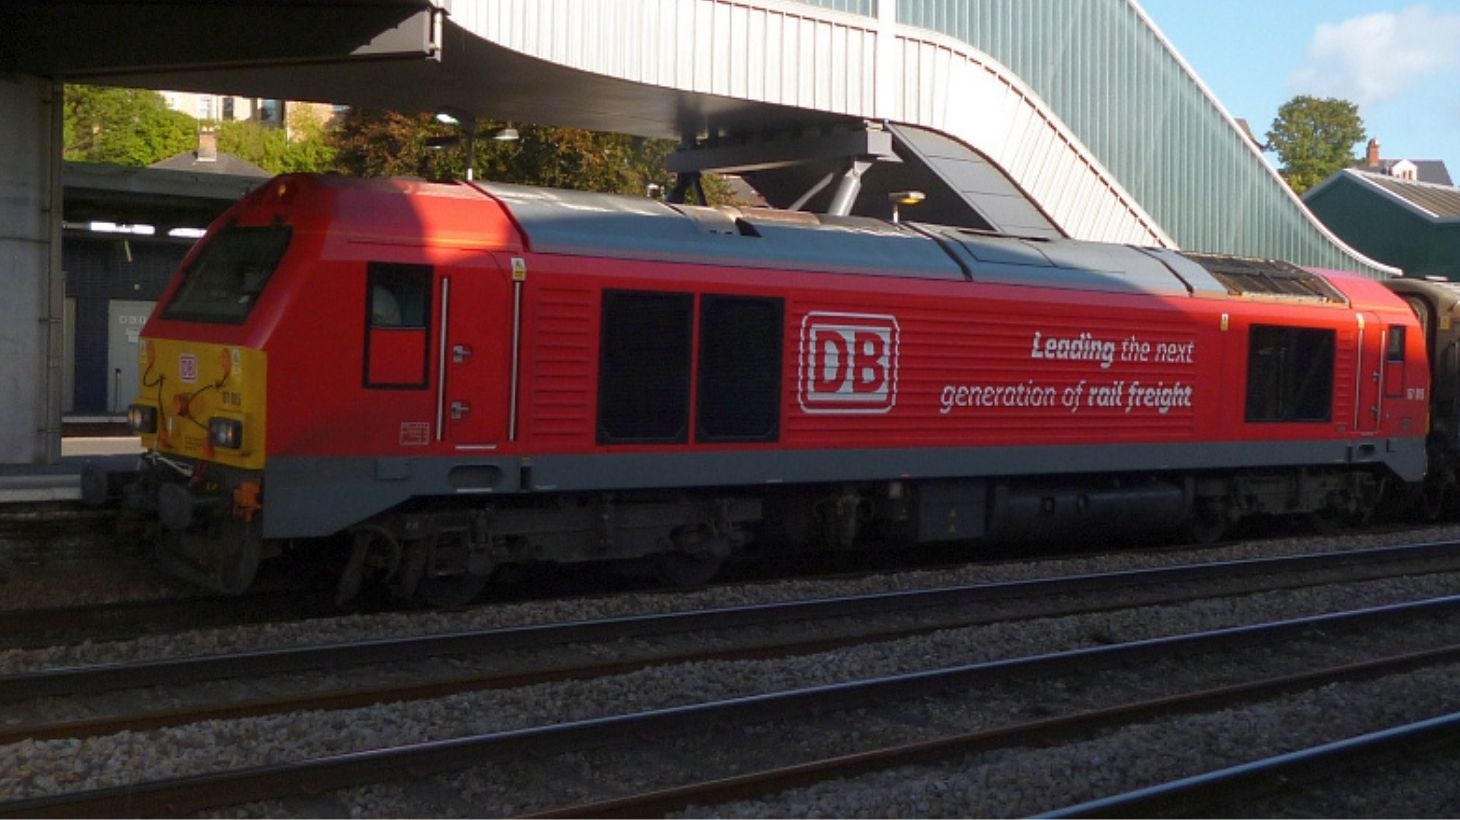 DB cargo train© Copyright Robin Drayton and licensed for reuse under this Creative Commons Licence.